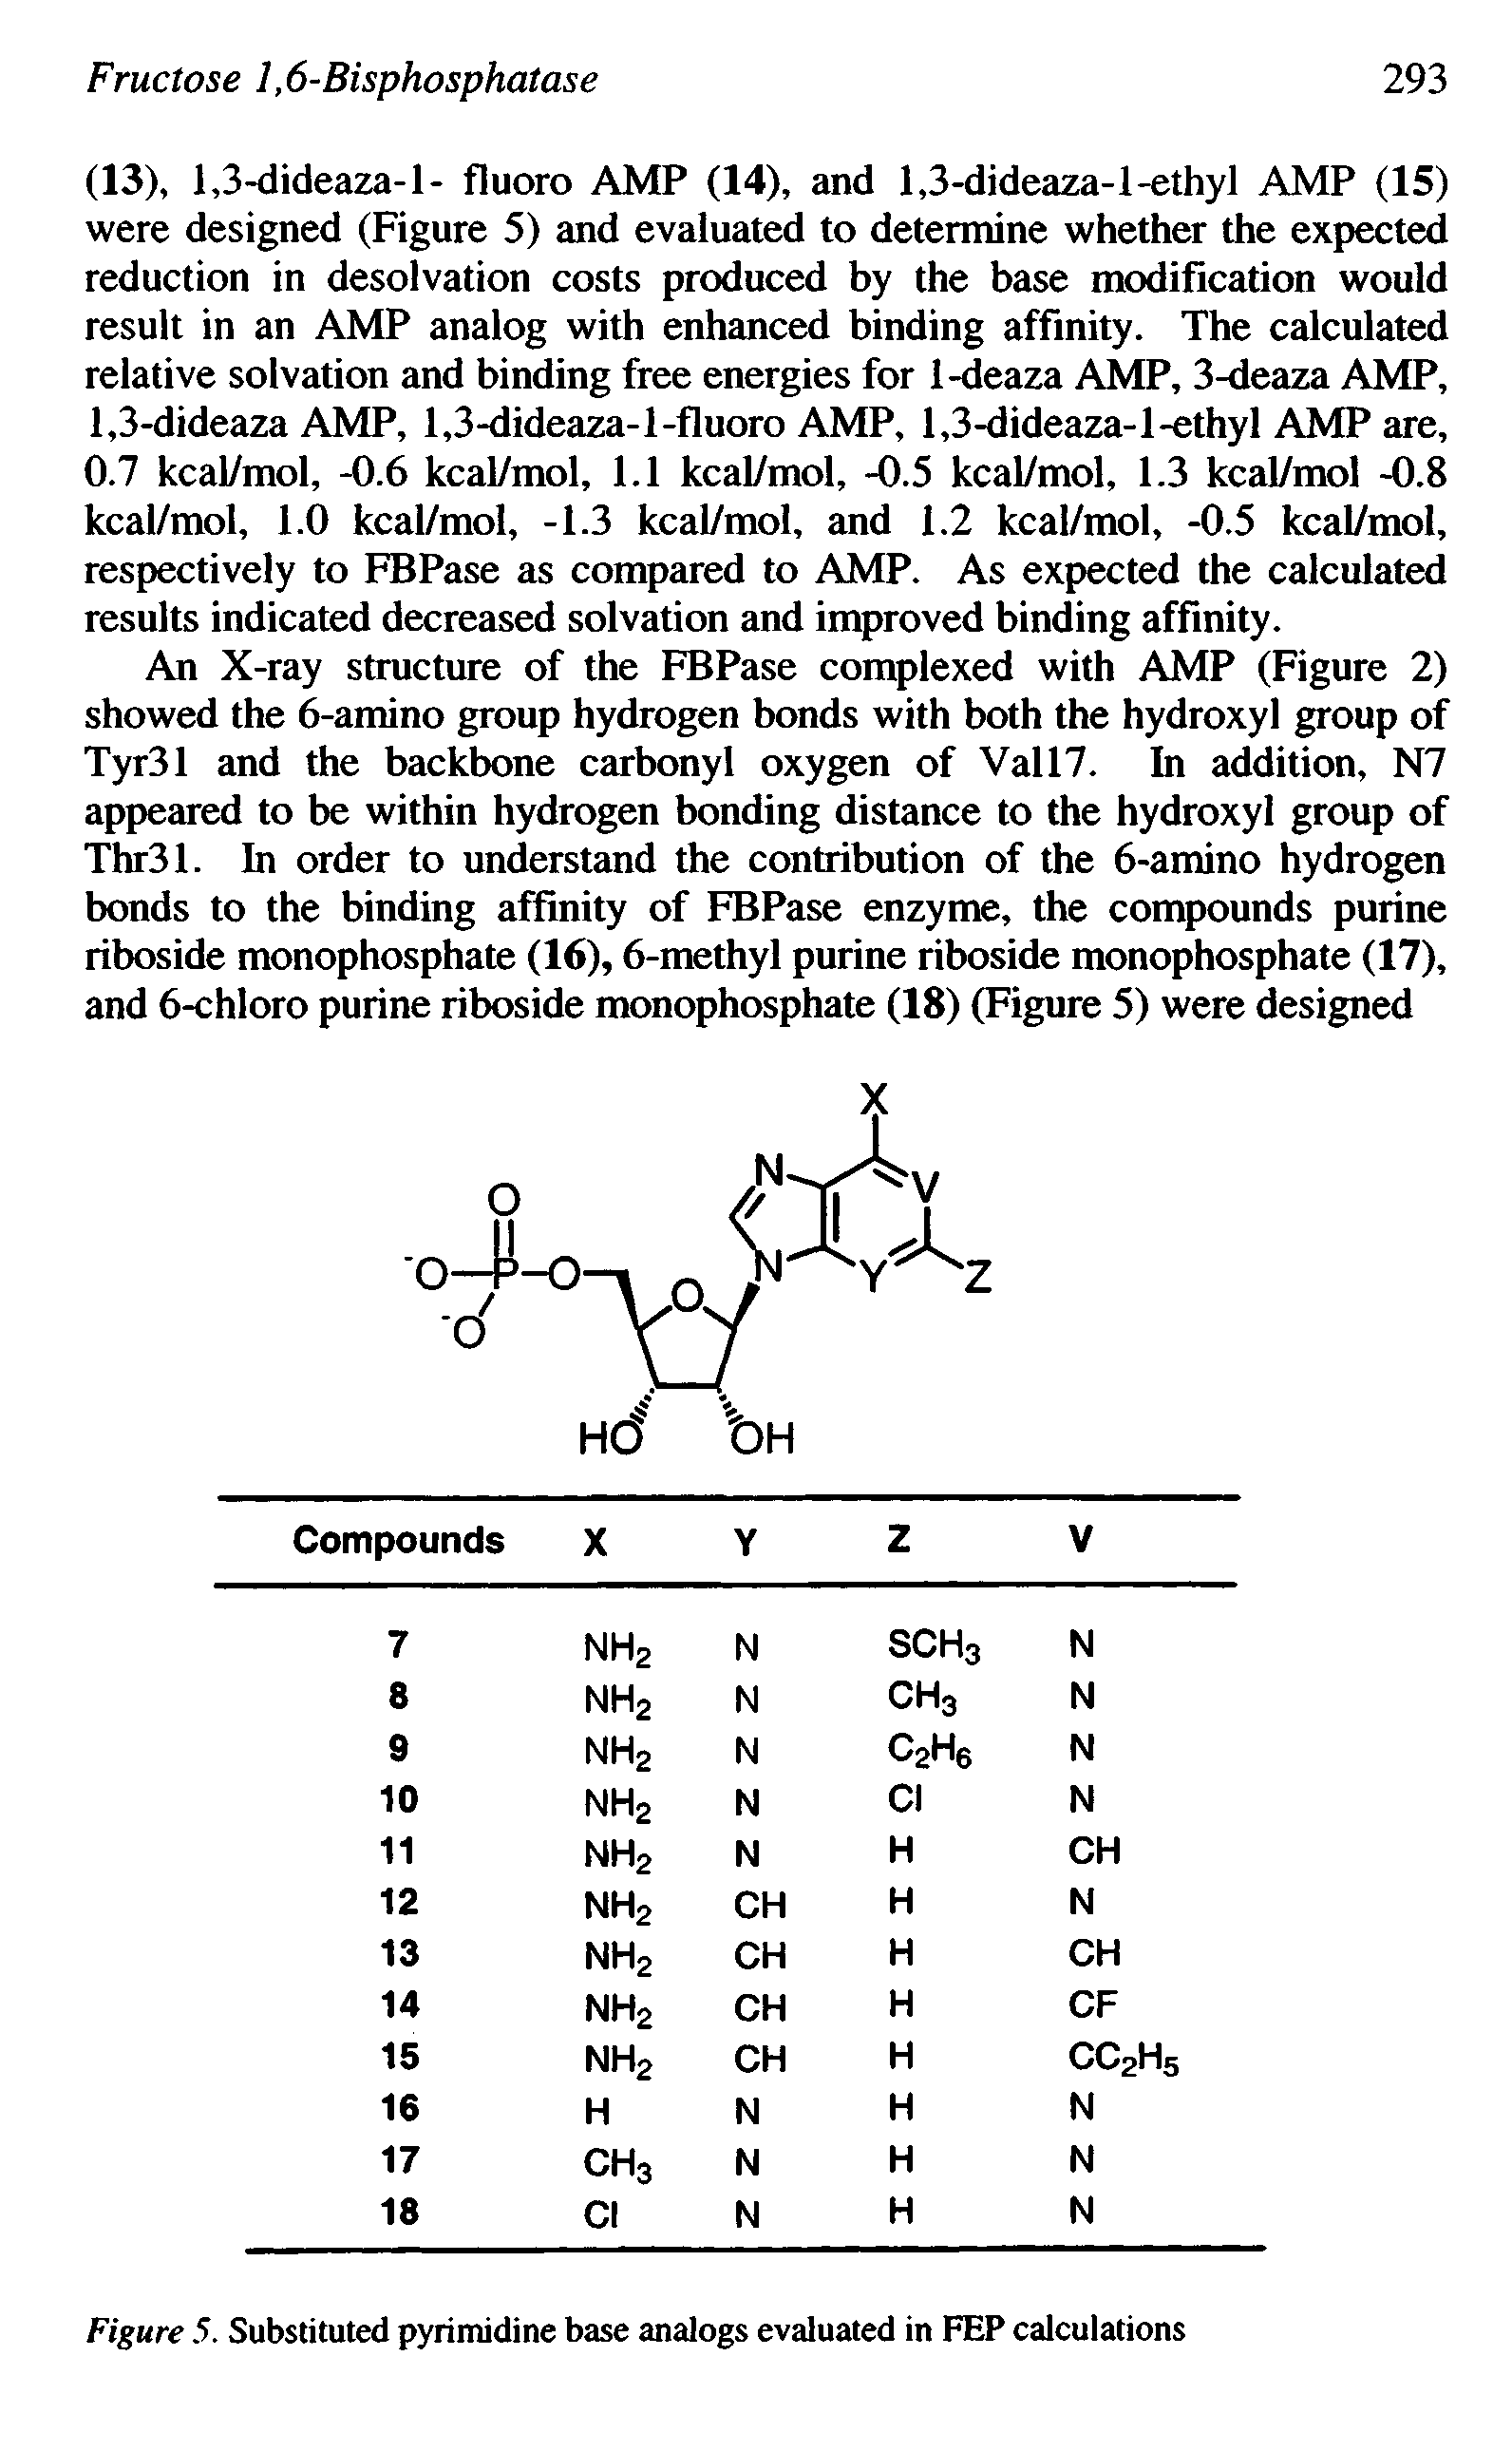 Figure 5. Substituted pyrimidine base analogs evaluated in FEP calculations...